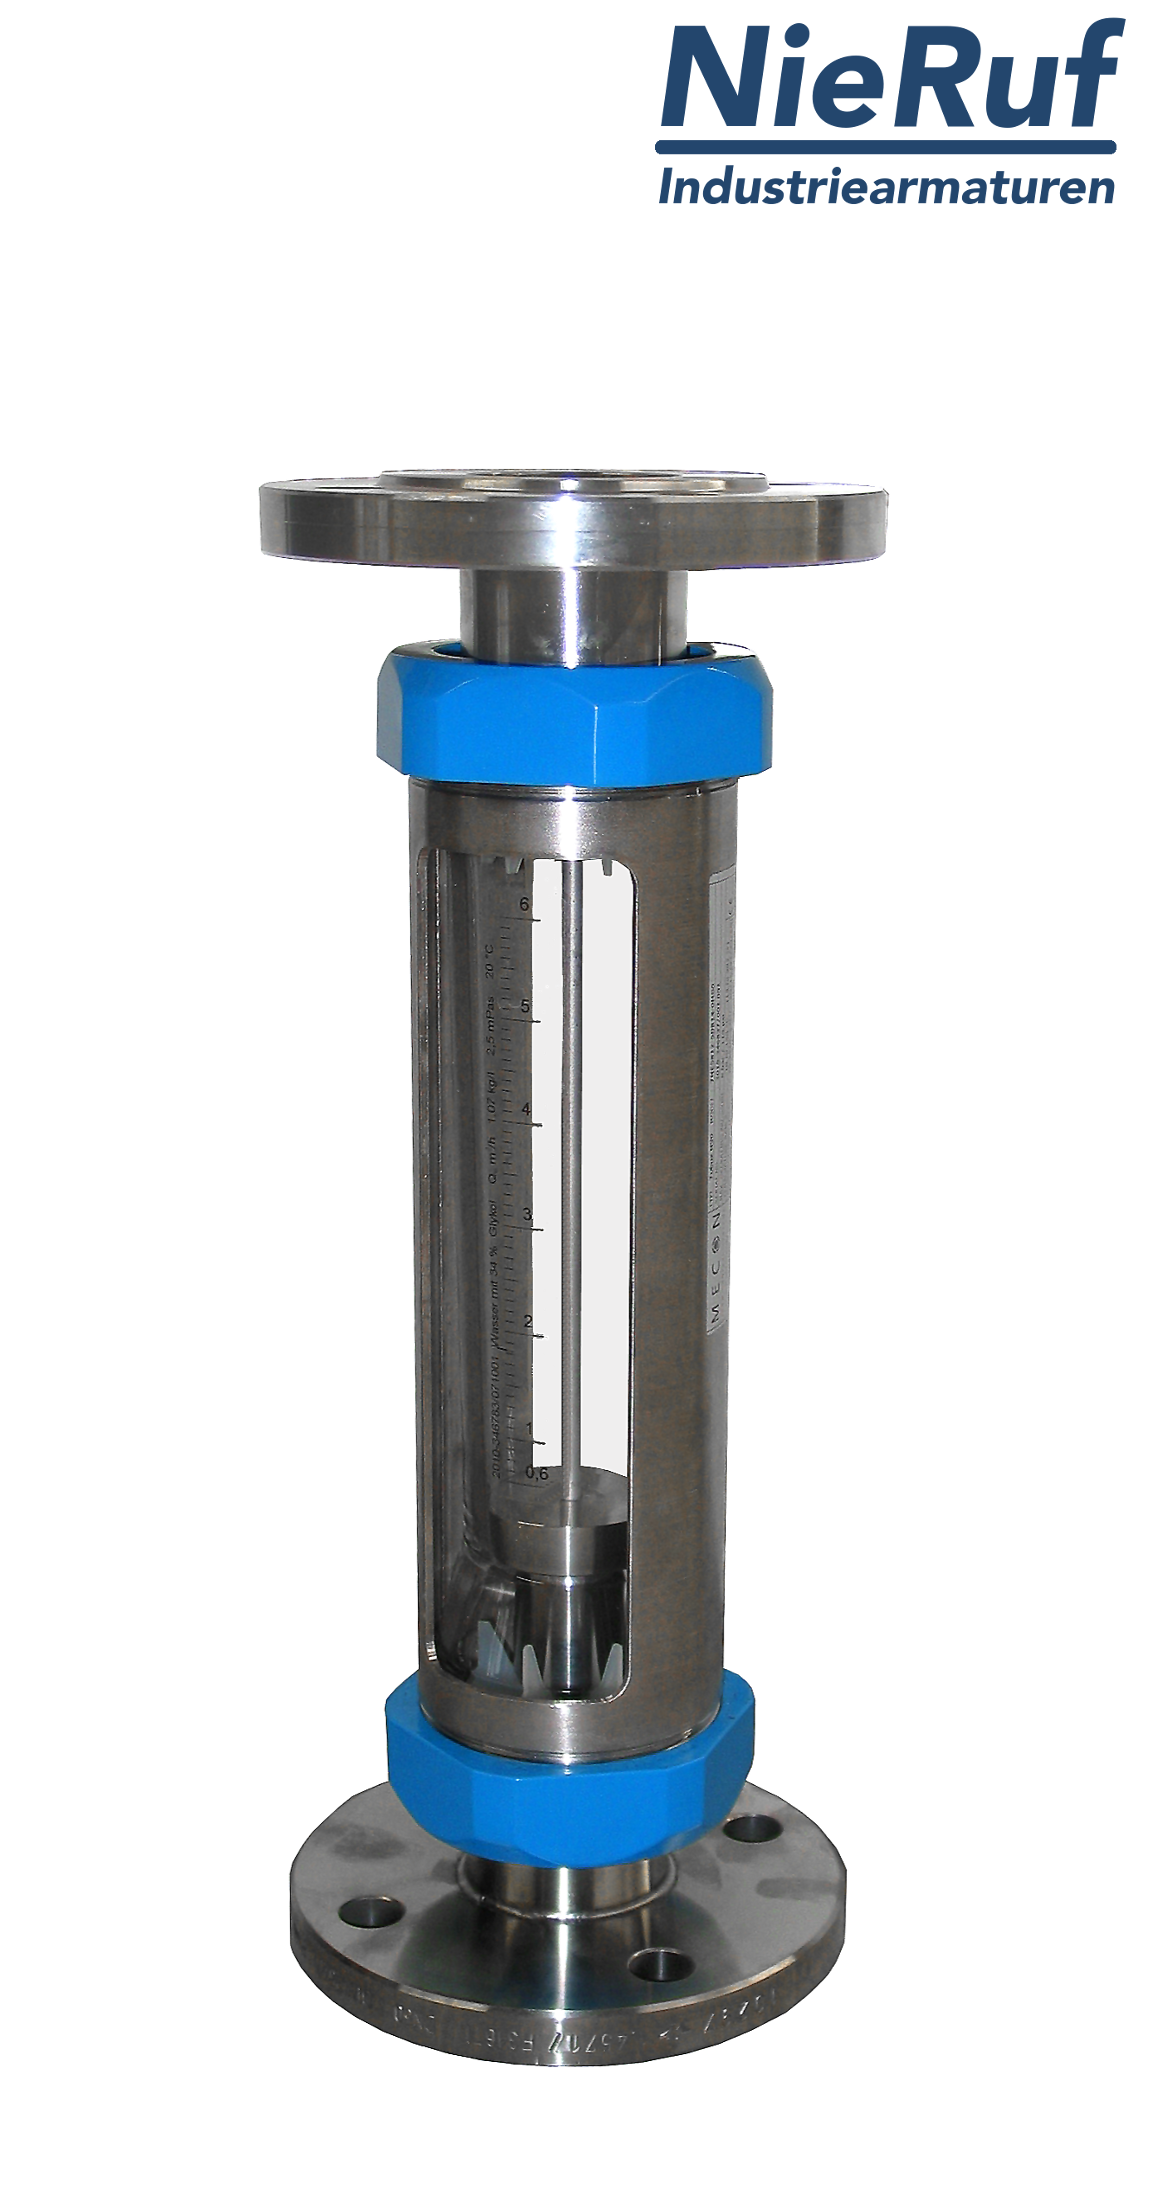 Variable area flowmeter stainless steel + borosilicate flange DN10 0.3 - 3.0 l/h water FKM